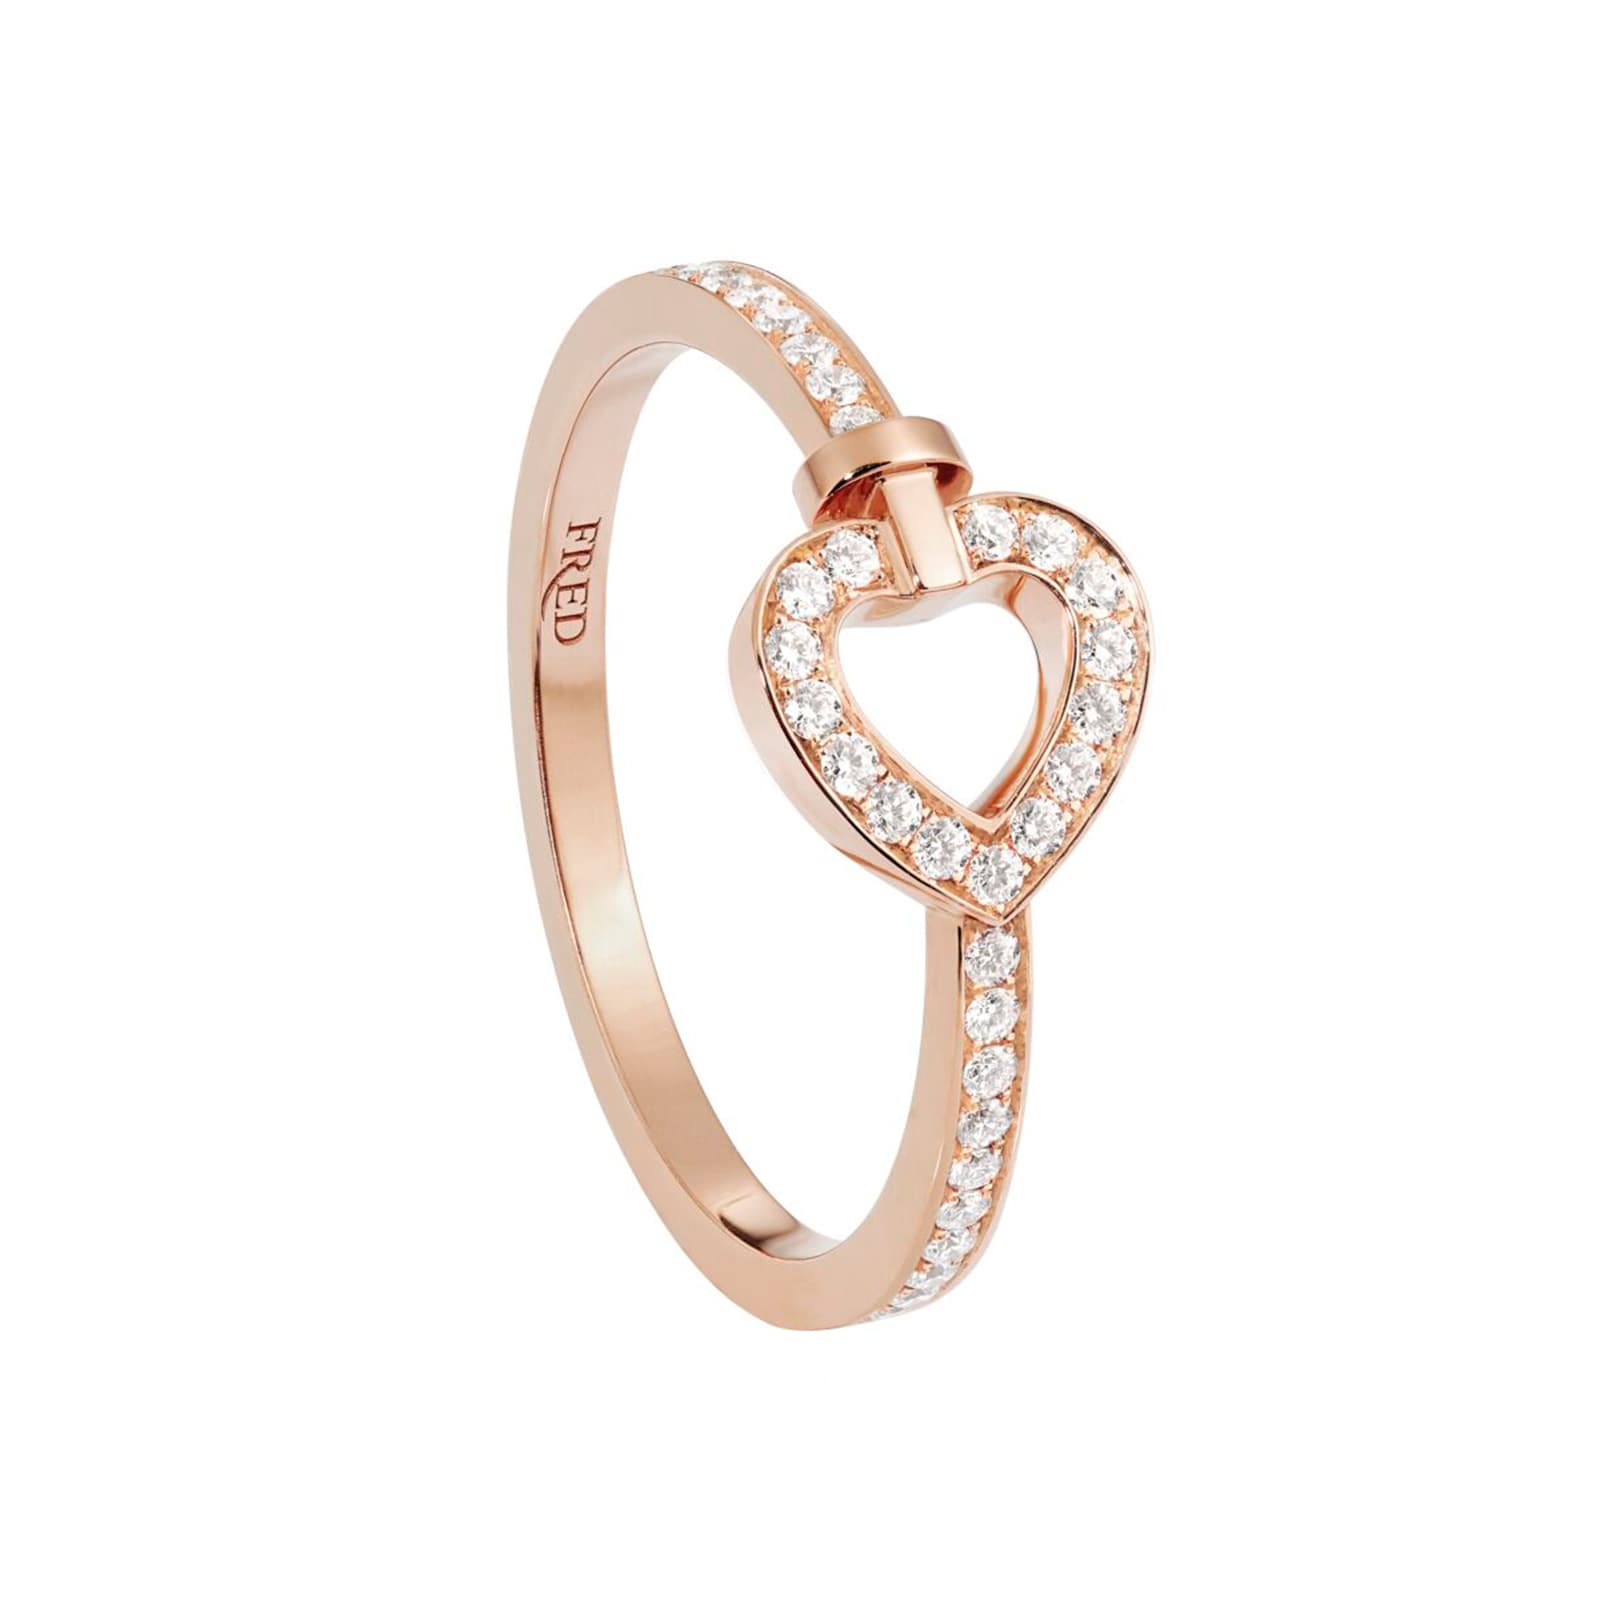 Pretty Woman 18ct Rose Gold 0.21ct Diamond Ring - Ring Size O